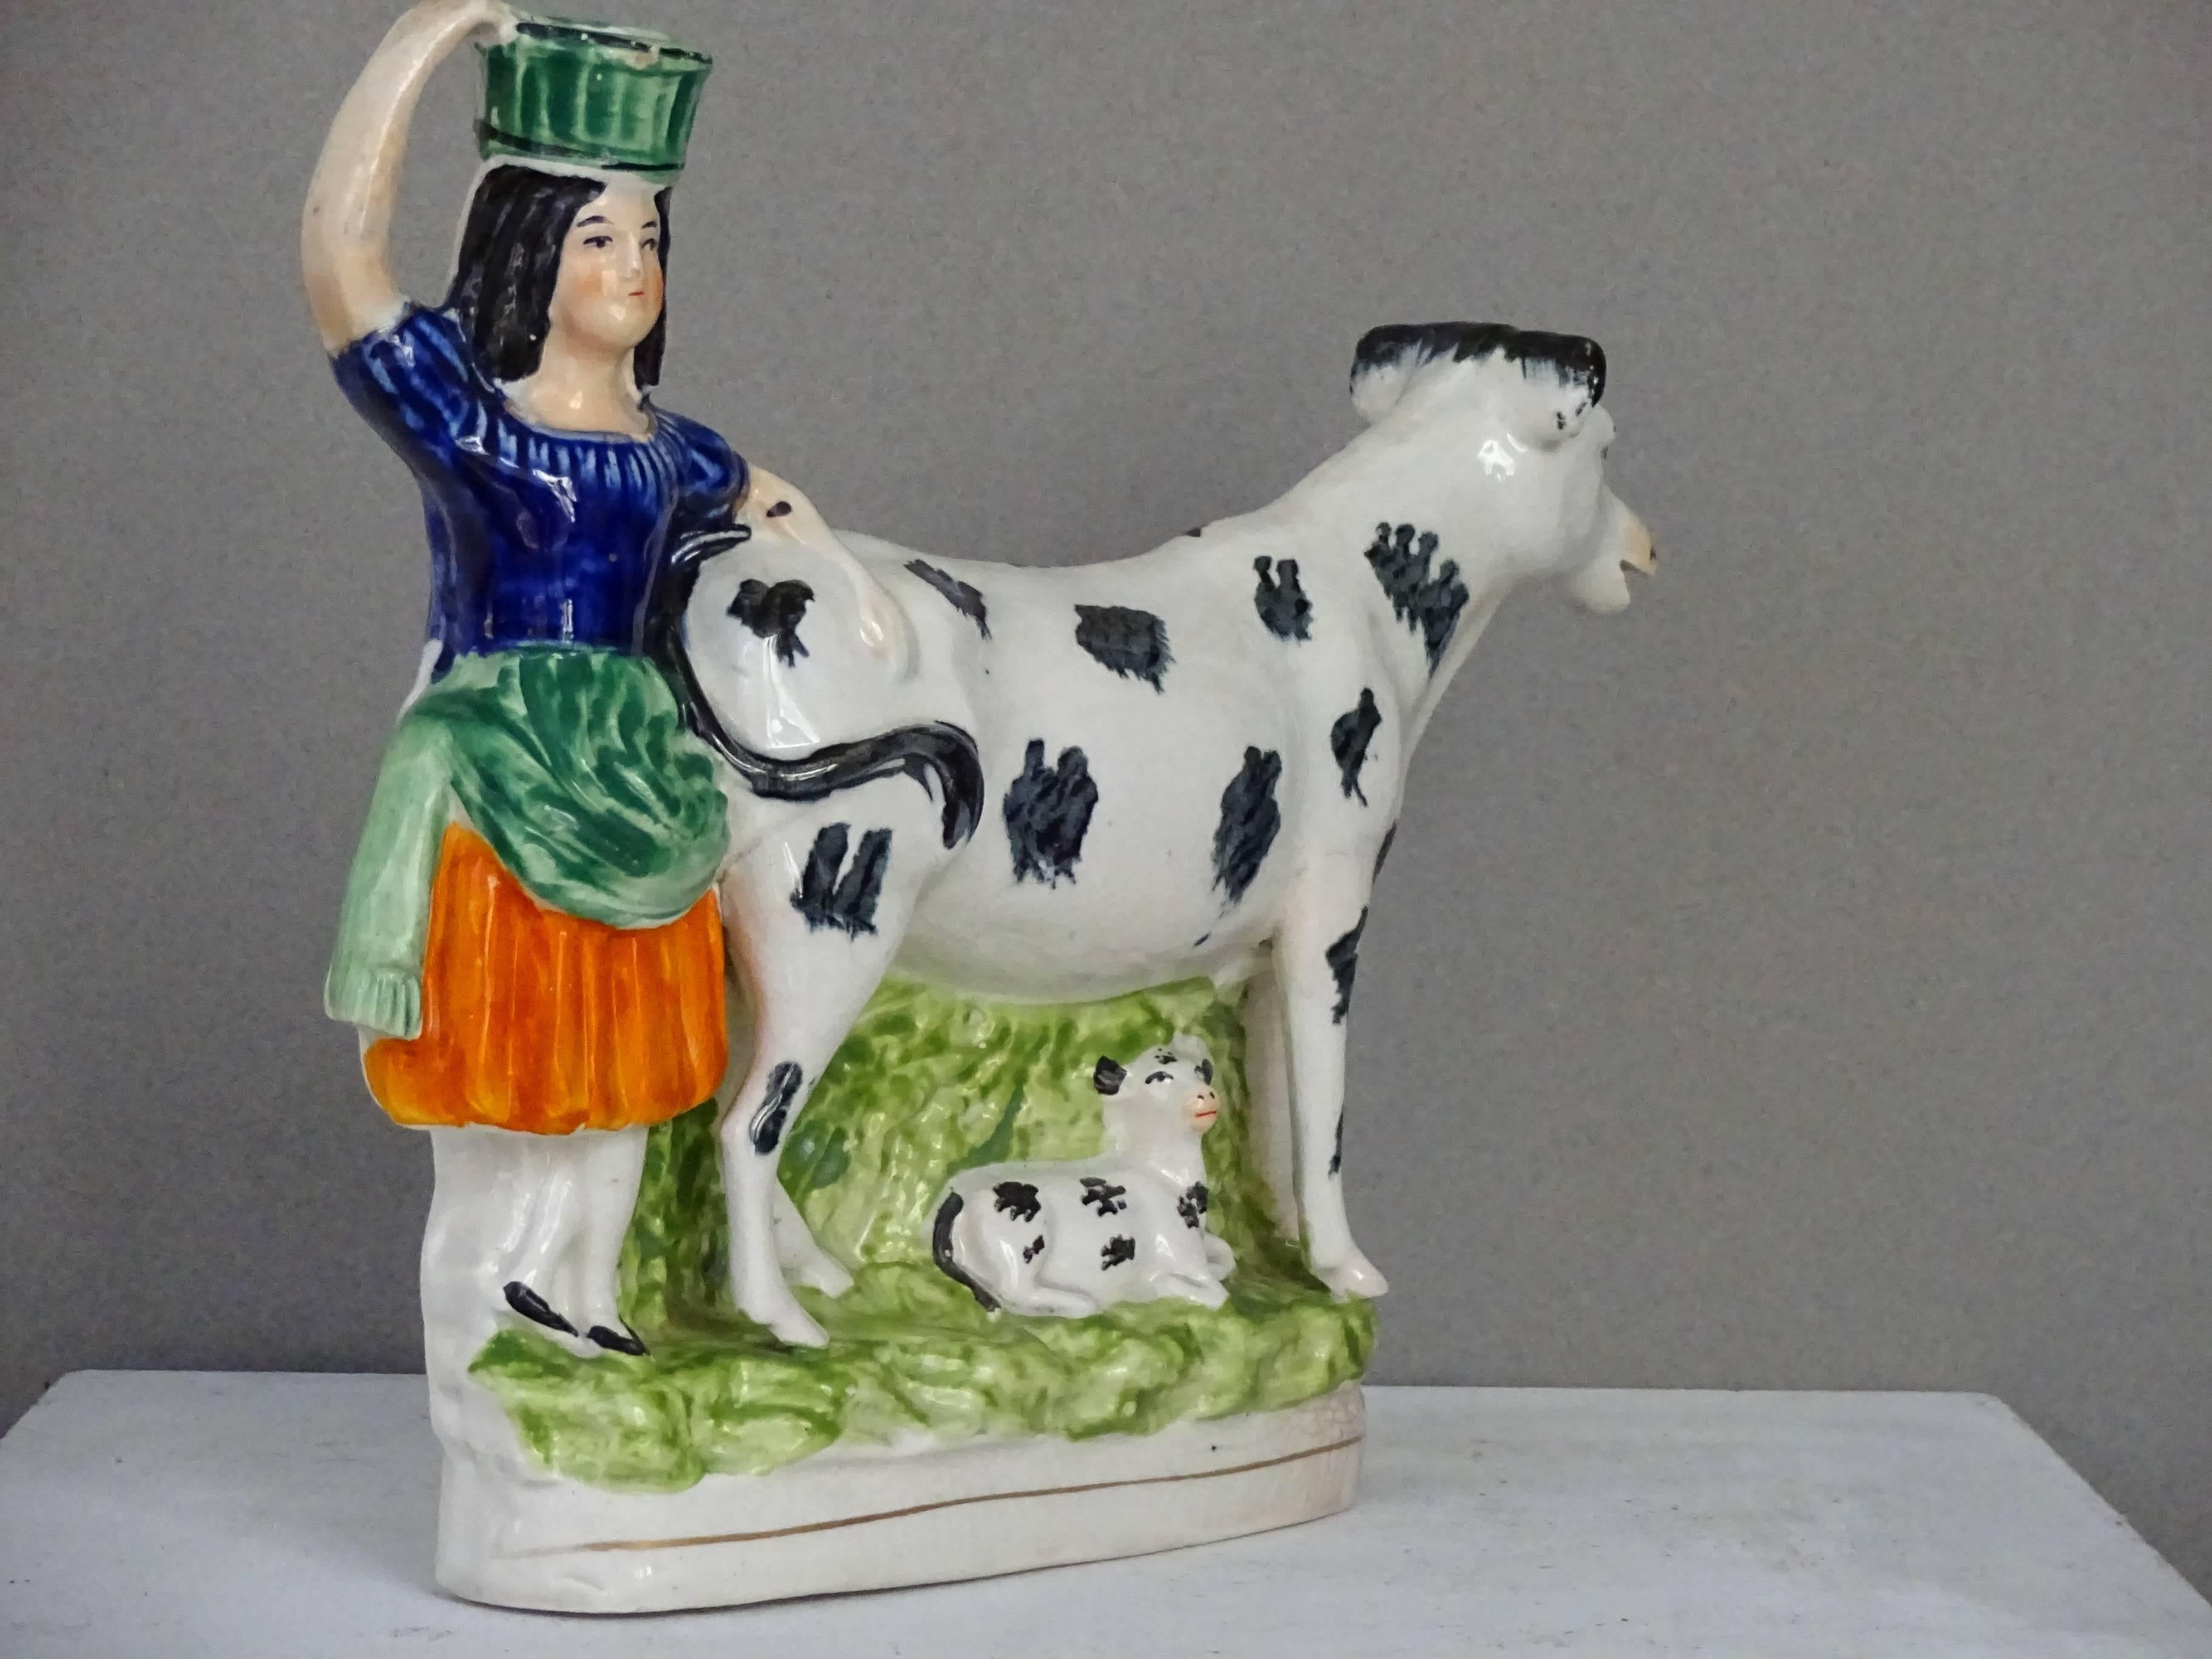 Mid-19th century Staffordshire figural cow creamer with milkmaid and calf.
Maiden has spill vase on her head.